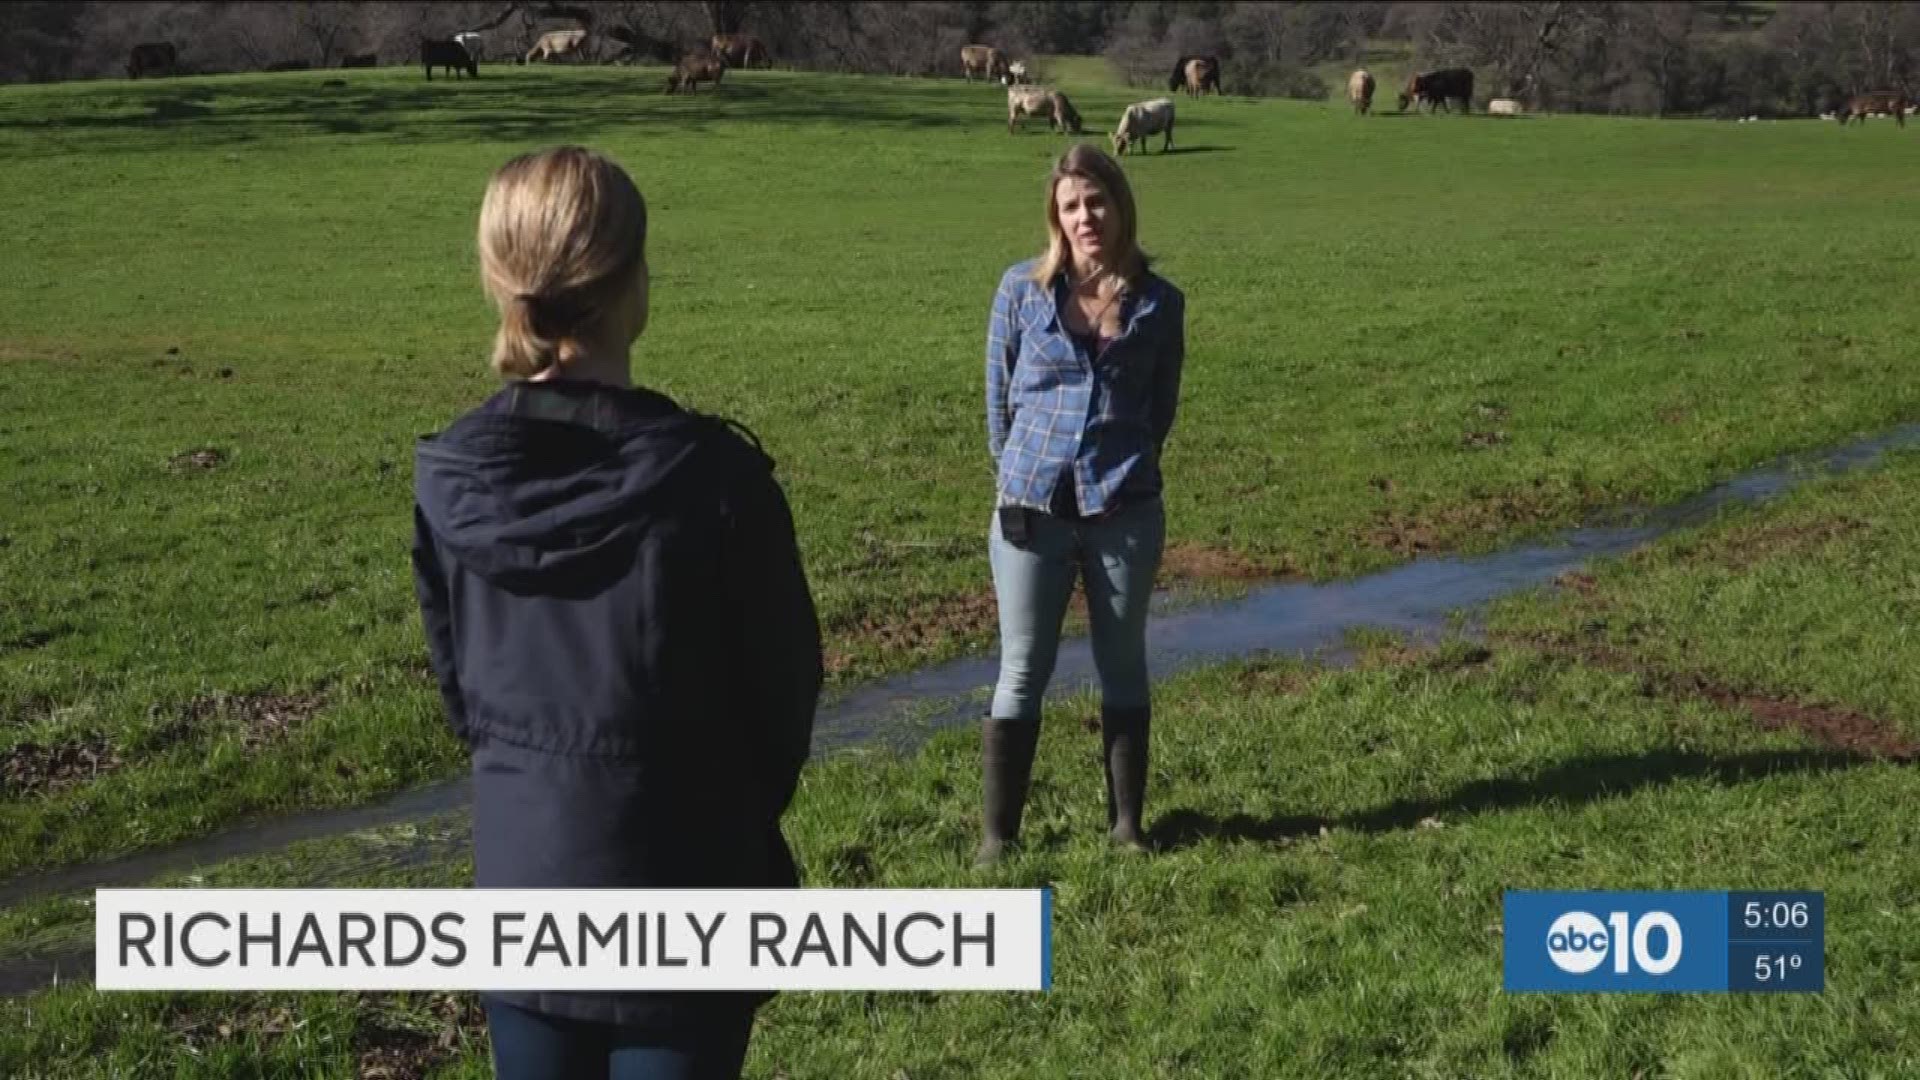 A new startup wants you to rethink the way you shop for steaks and doing that could mean big business for family ranches in California. (Jan. 24, 2017)